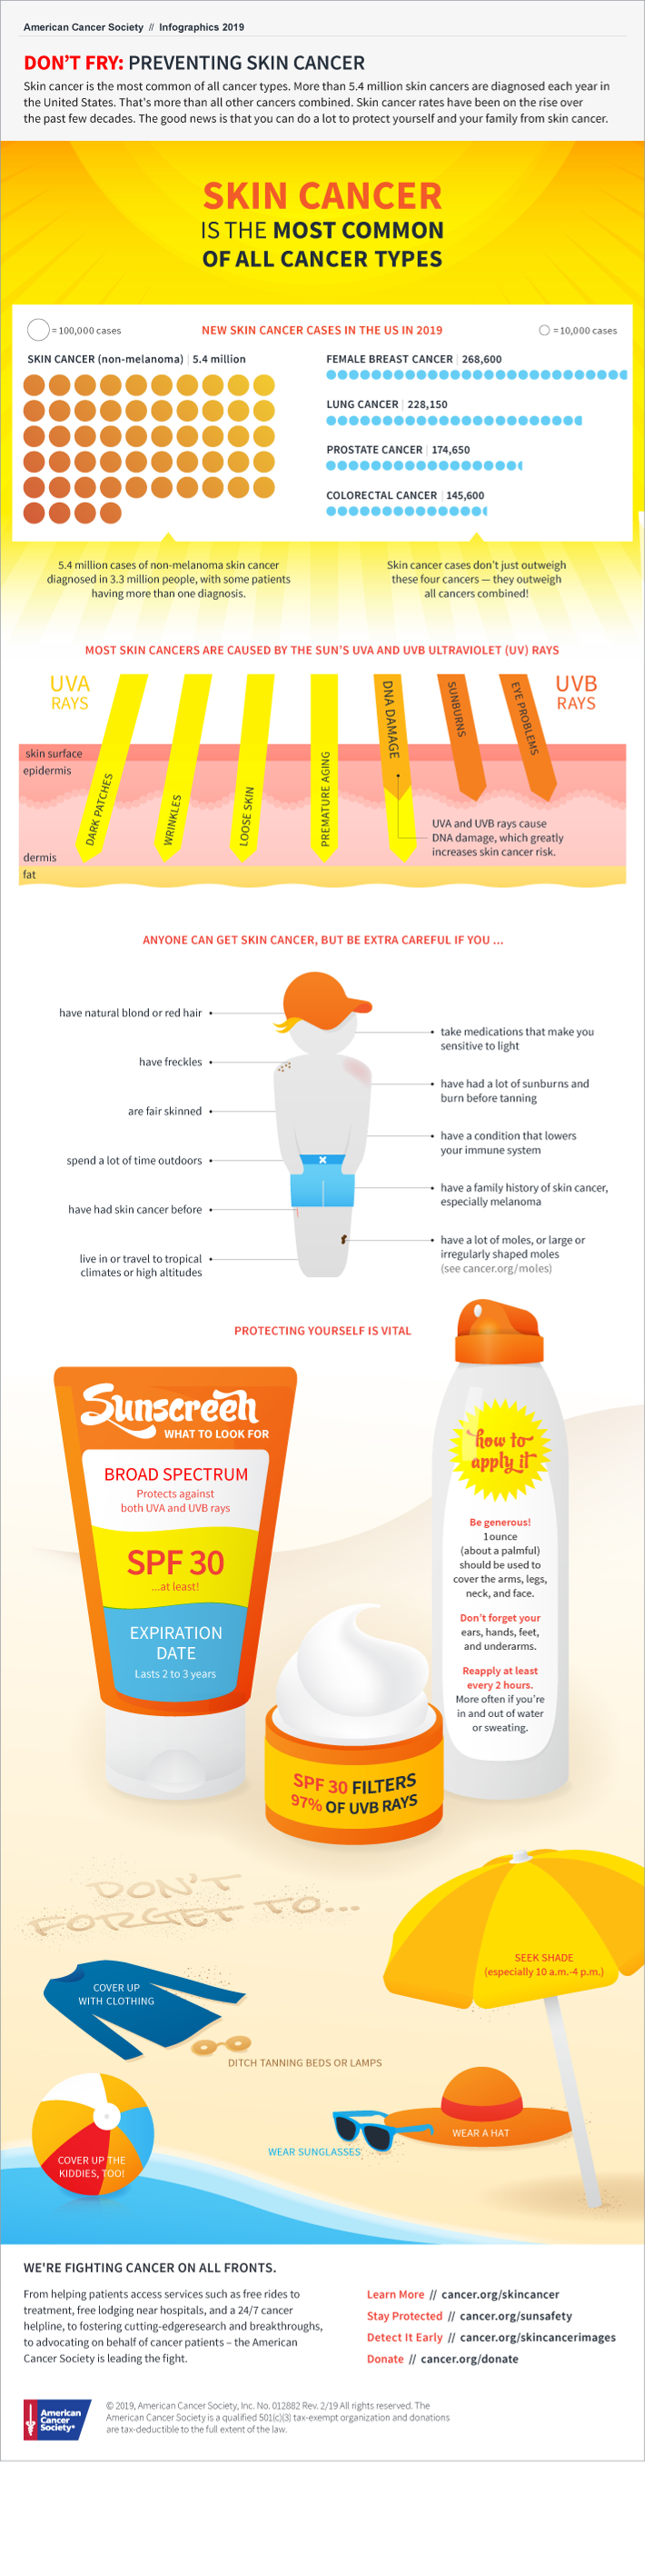 Infograph From The American Cancer Society On How To Avoid Skin Cancer